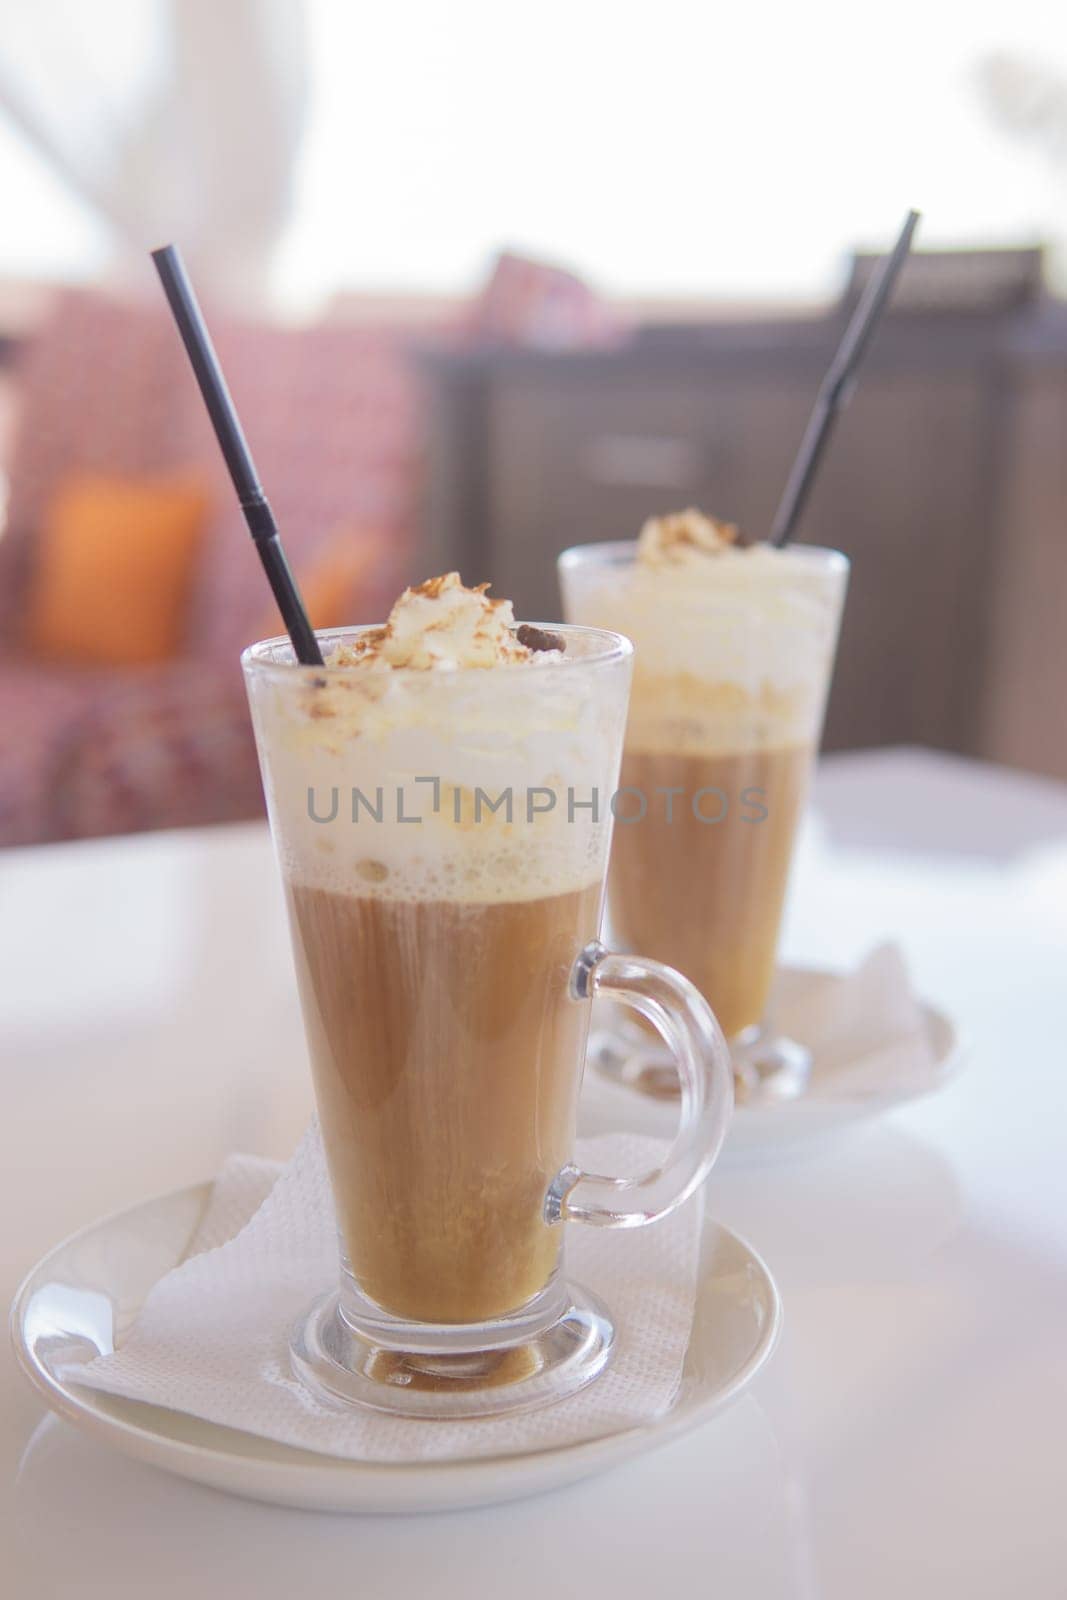 coffee is served in a tall glass glass with a straw. The concept of coffee drinks from the bar menu by Annu1tochka